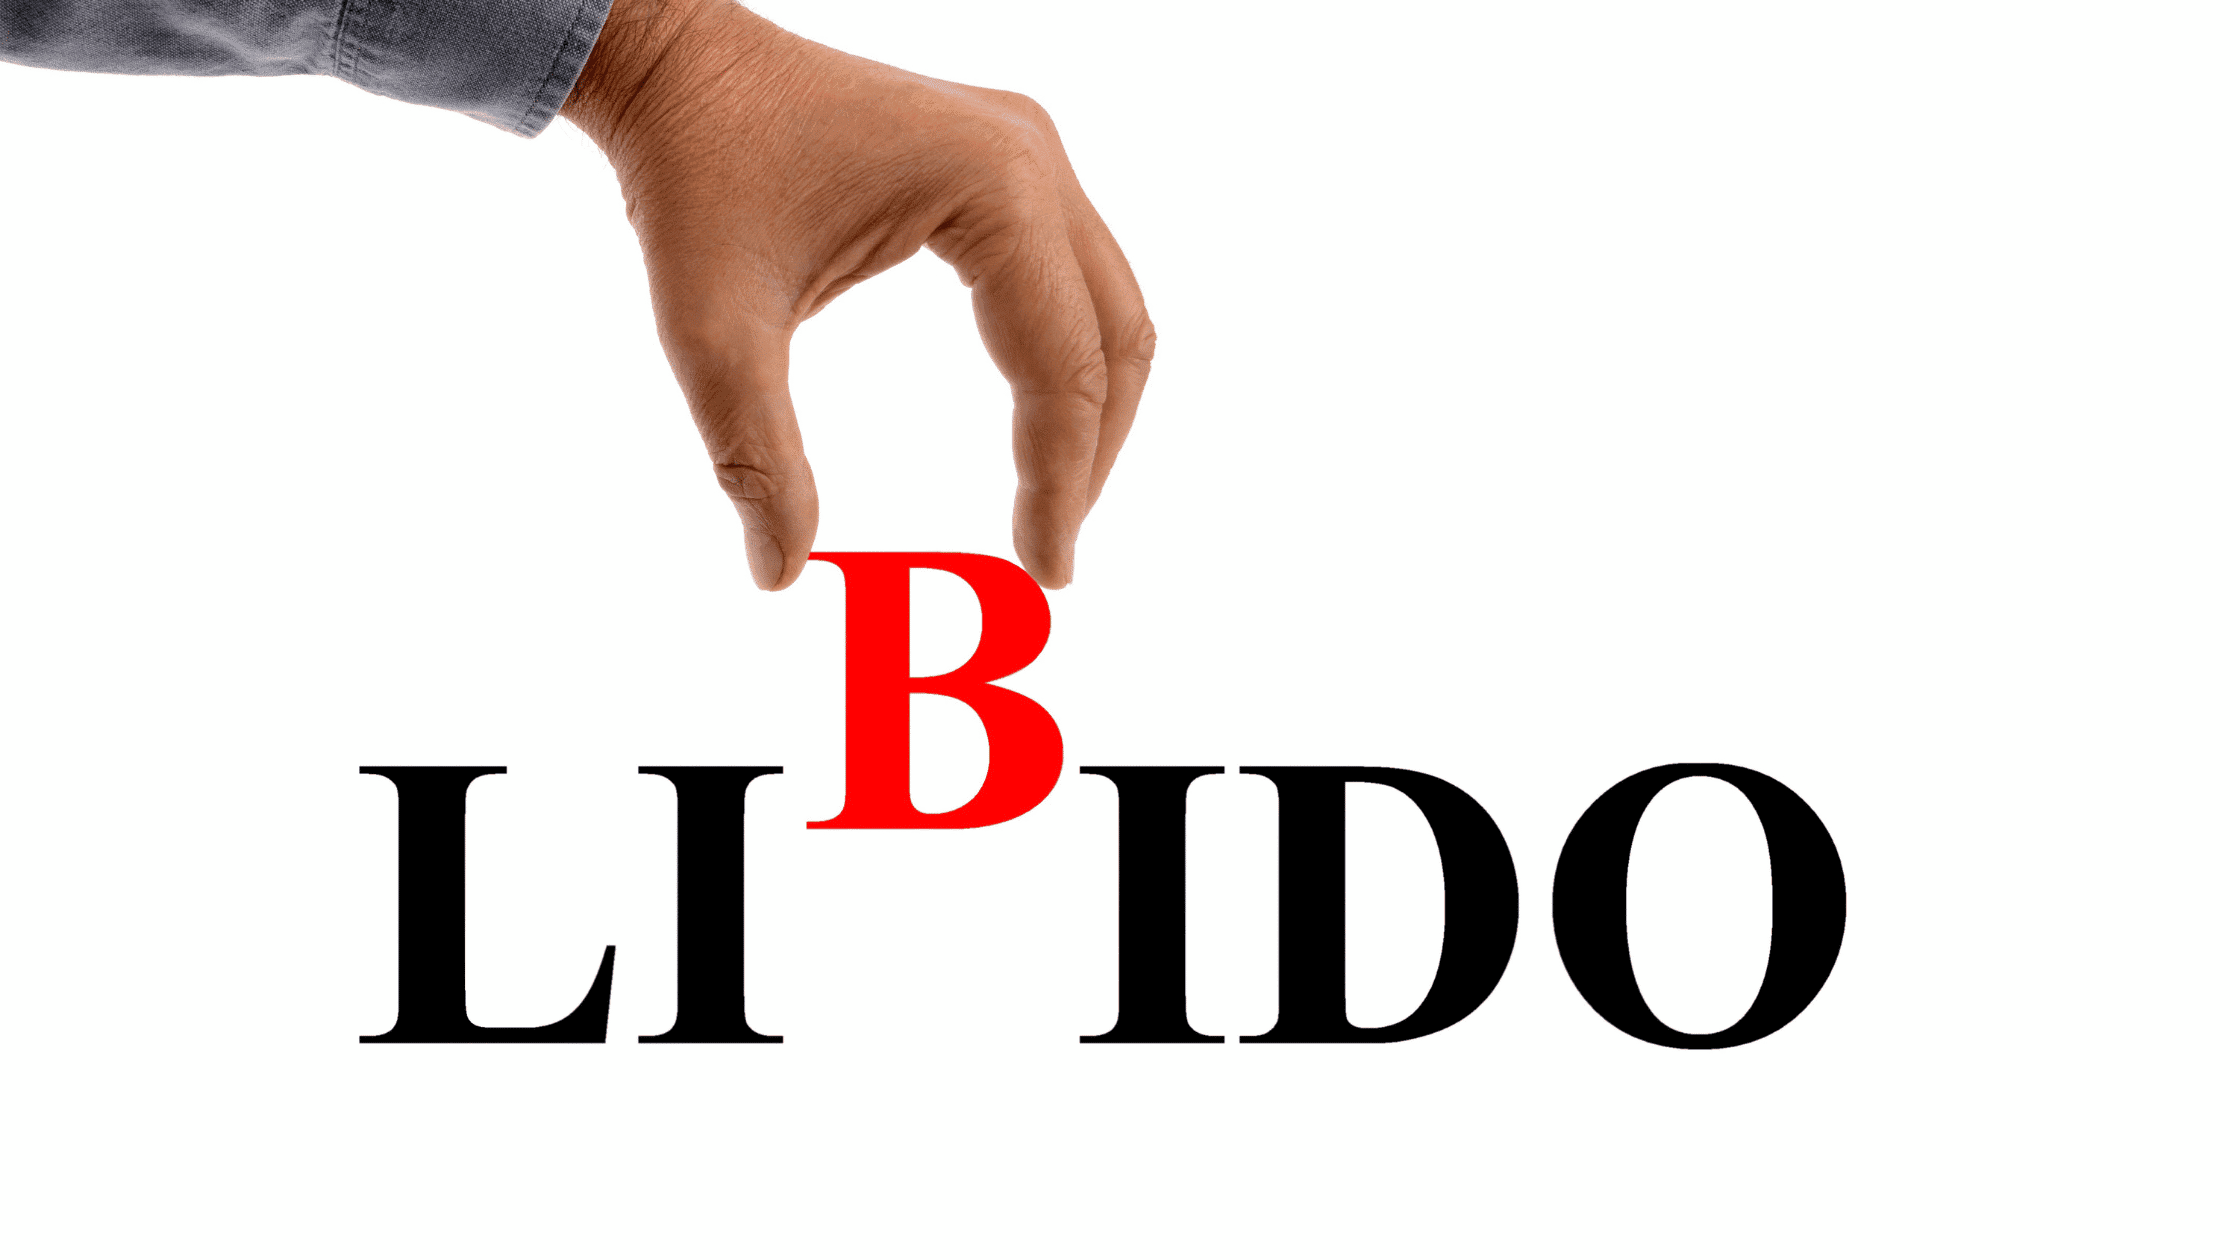 Hand placing the letter b in the word Libido